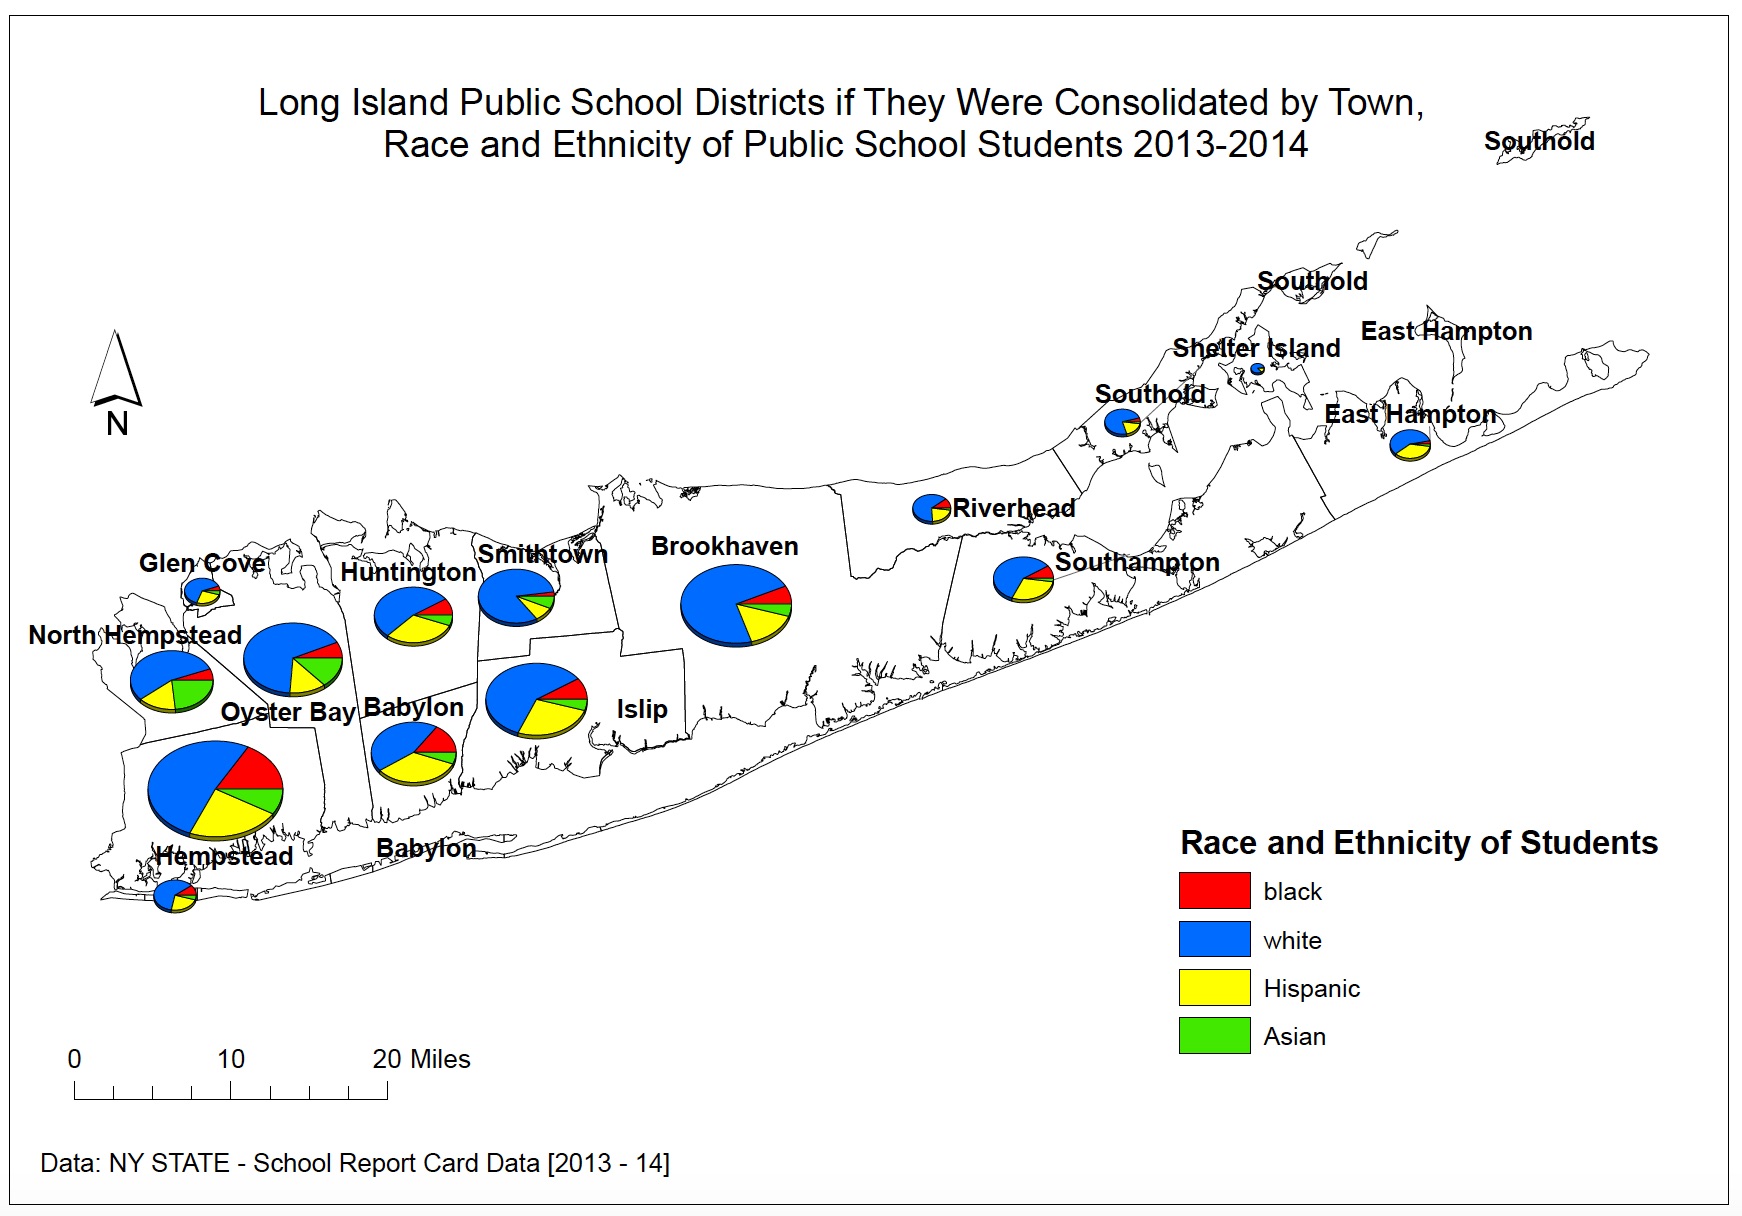 Public School Districts if They Were Consolidated by Town Race and Ethnicity of Public School Students 2013-14